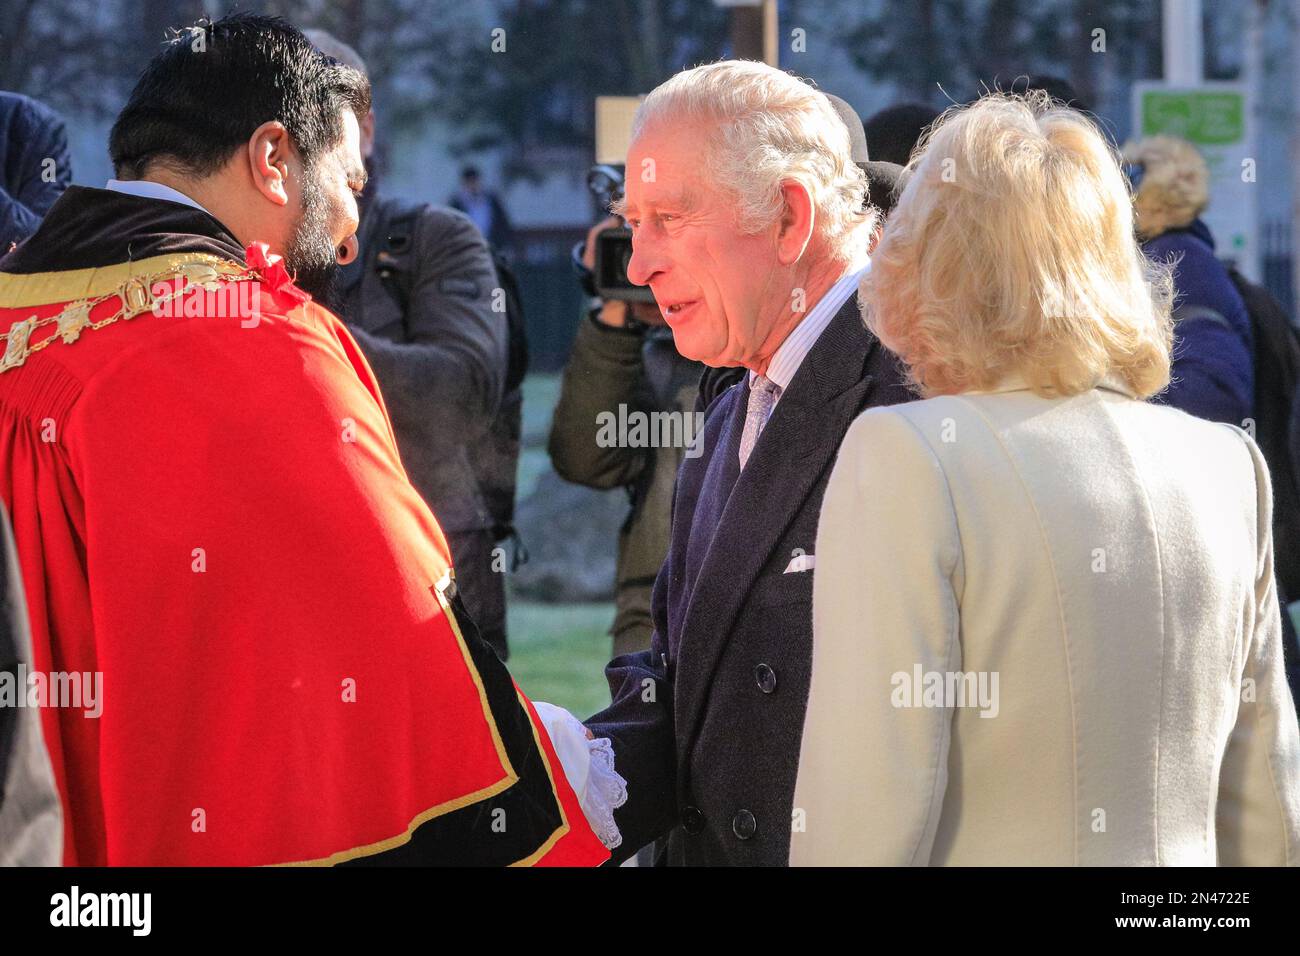 London, UK. 08th Feb, 2023. Their Majesties King Charles and Camilla, the Queen Consort, at Altab Ali Park in Whitechapel, East London. They meet community members who were involved in the anti-racism movement of the 60s and 70s, speak to young people at the Shaheed Minar monument and plant a Dodoens Elm tree together to commemorate Altab Ali. Credit: Imageplotter/Alamy Live News Stock Photo